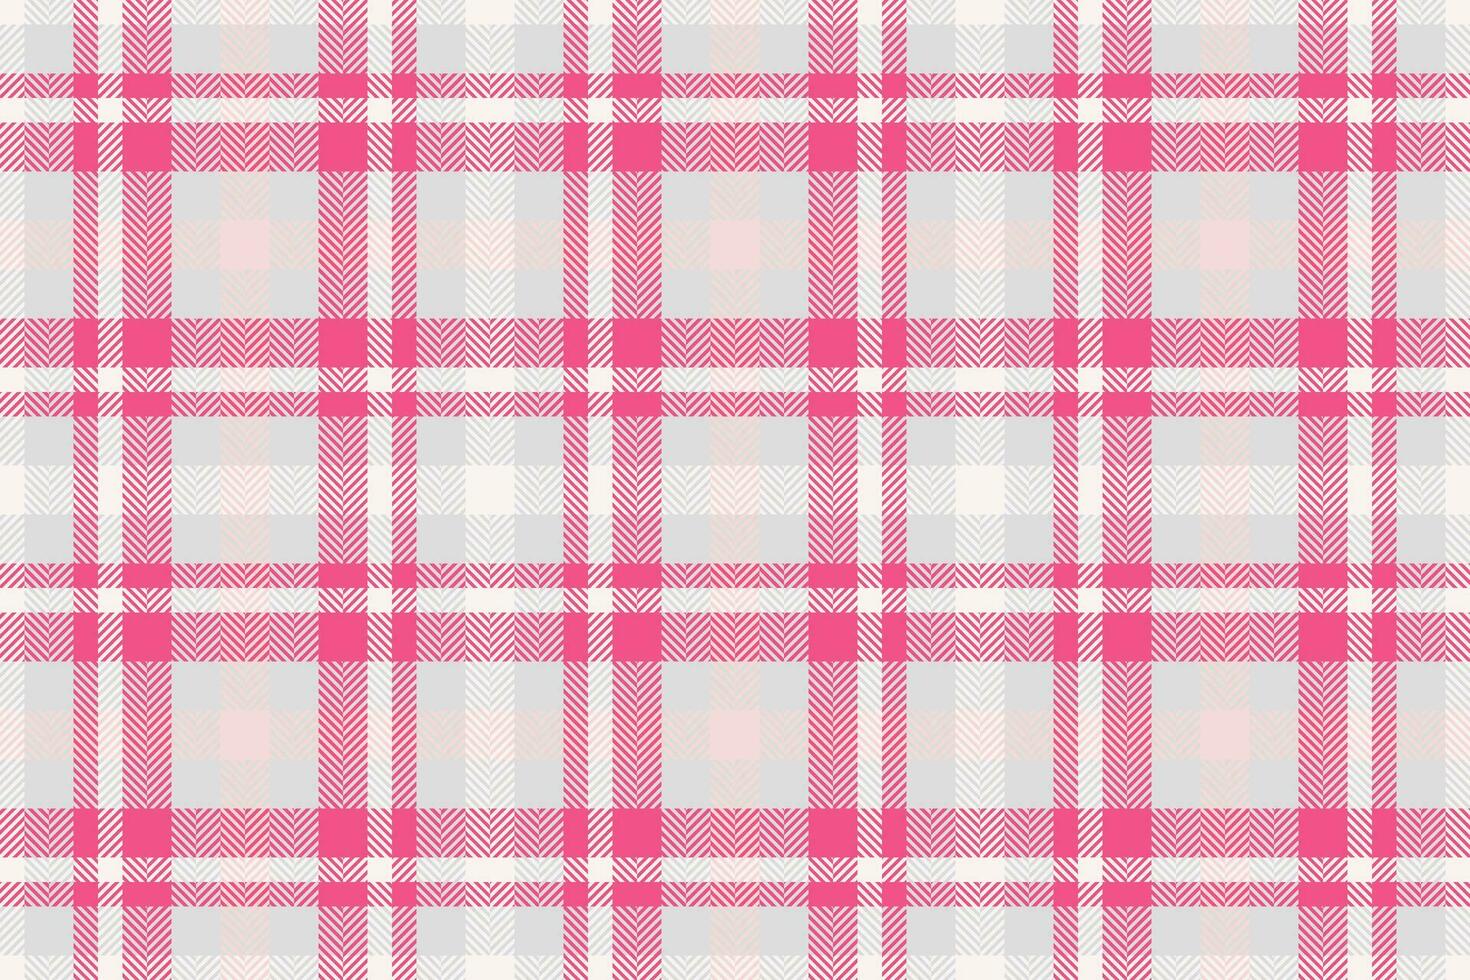 Textile vector seamless of texture background pattern with a fabric tartan check plaid.